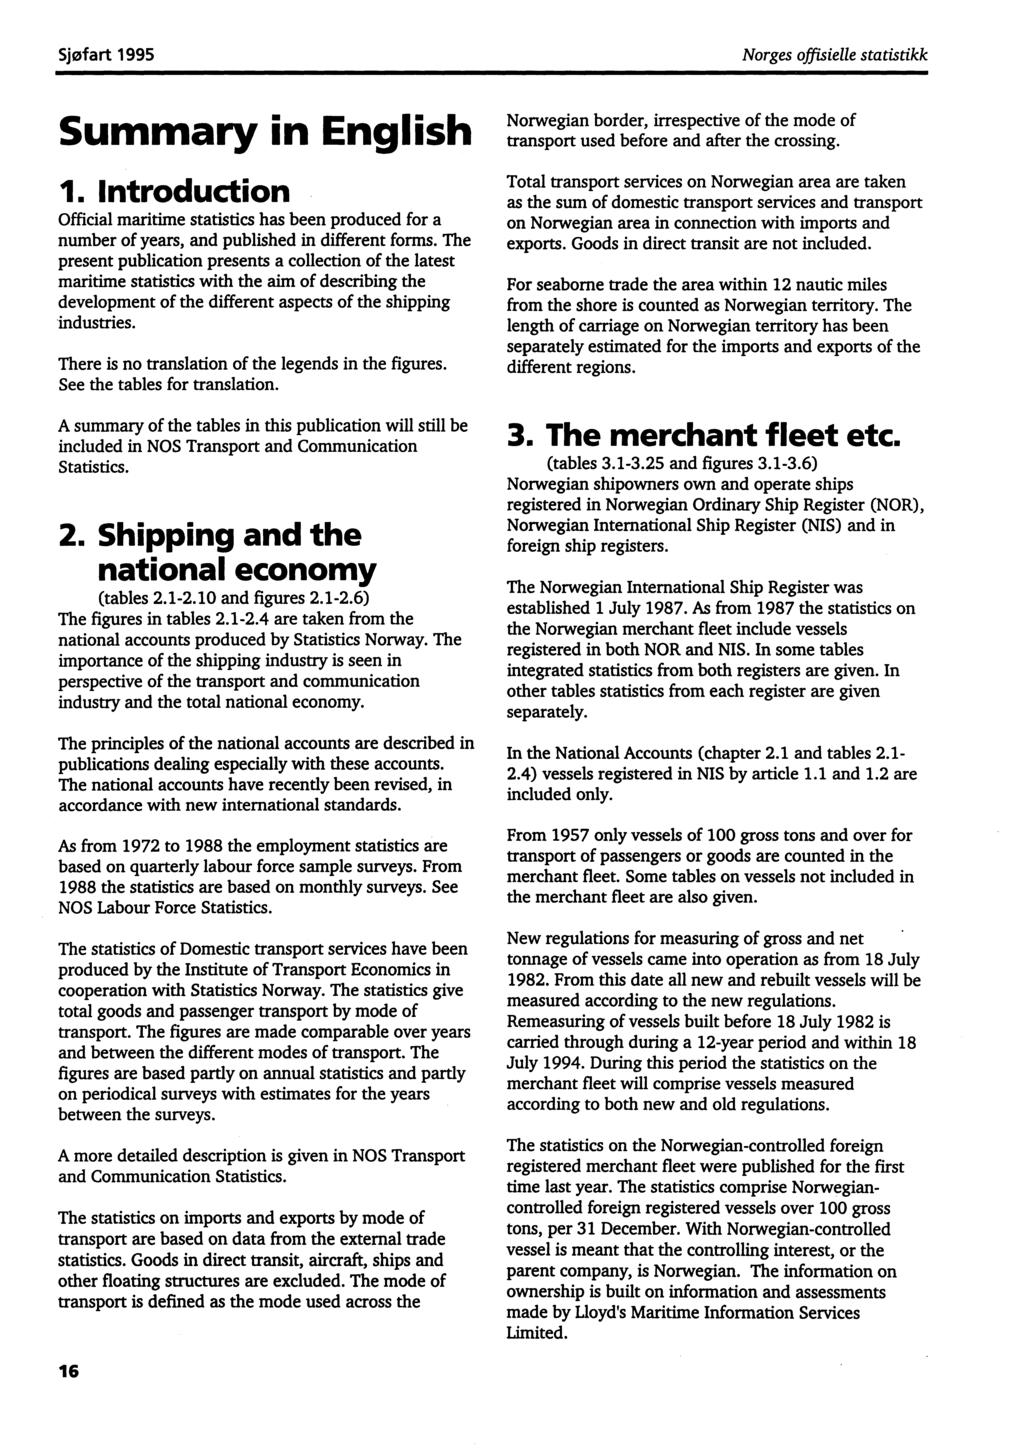 Sjøfart 1995 Norges offisielle statistikk Summary in English 1. Introduction Official maritime statistics has been produced for a number of years, and published in different forms.